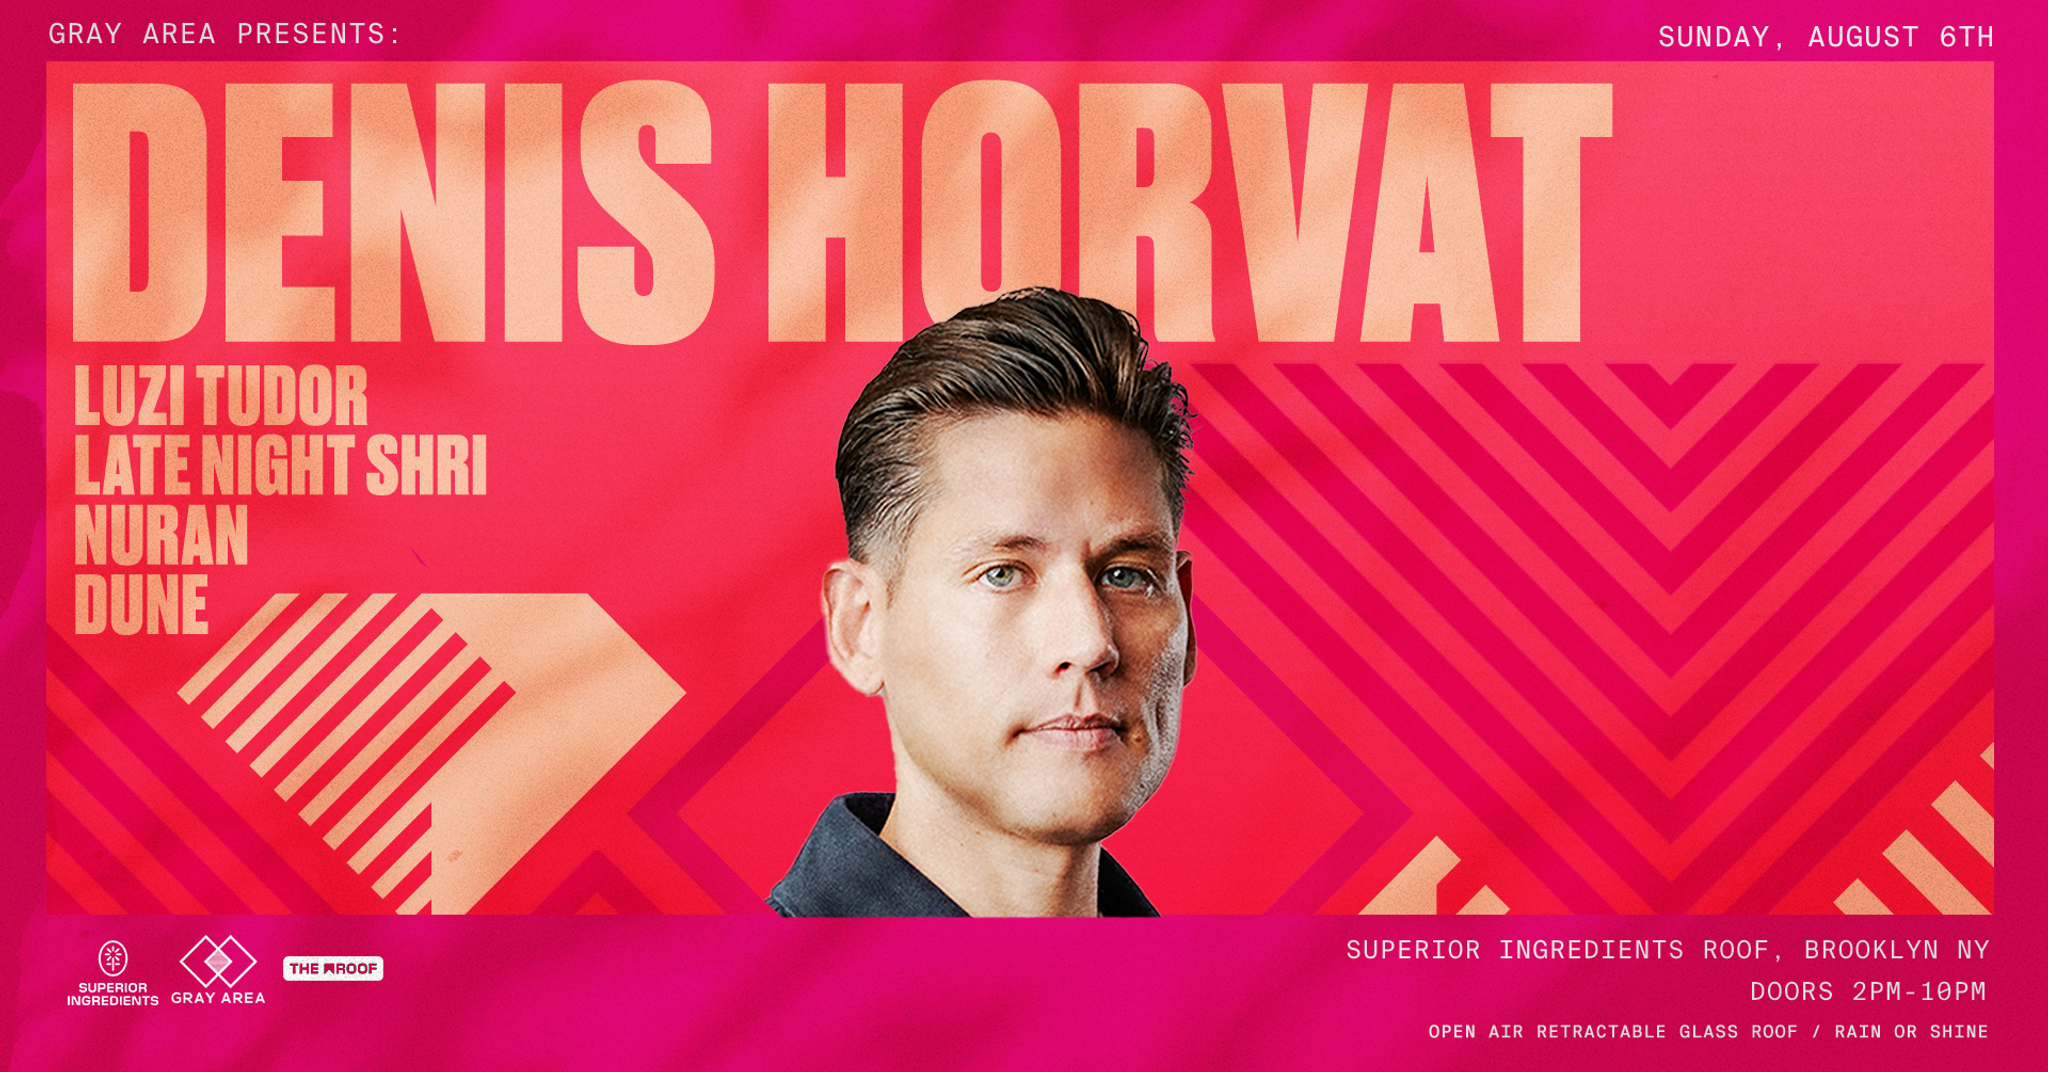 AFTER : HOURS + DENIS HORVAT [Afterlife, Innervisions] Tickets, TULUM